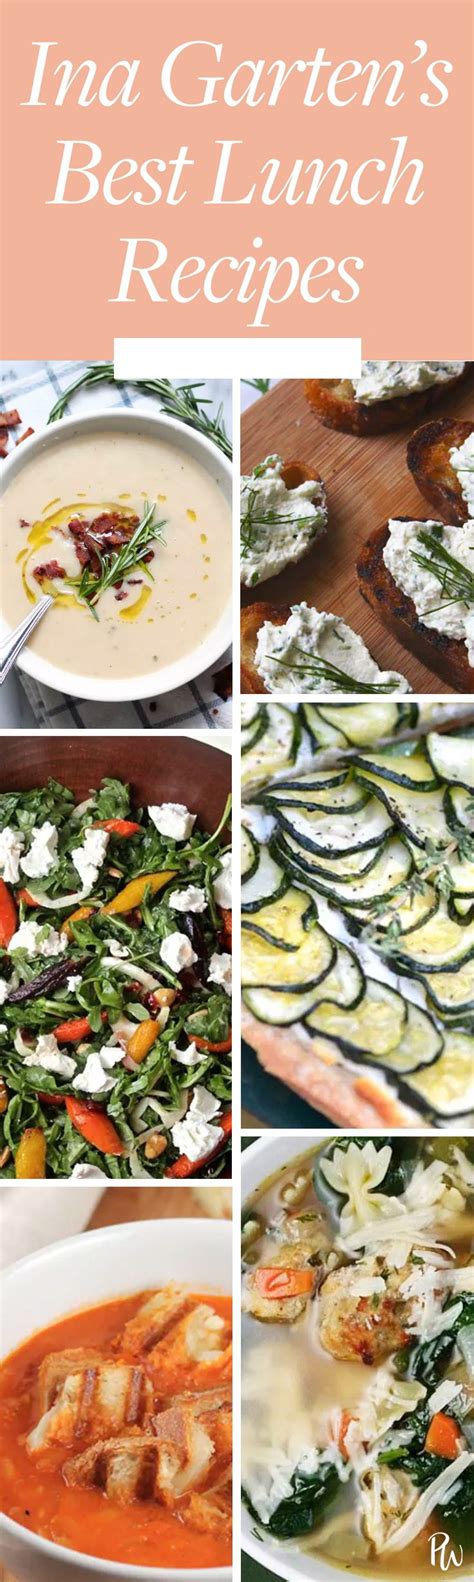 20 Lunch Recipes From Ina Garten That Are Totally Fabulous Luncheon